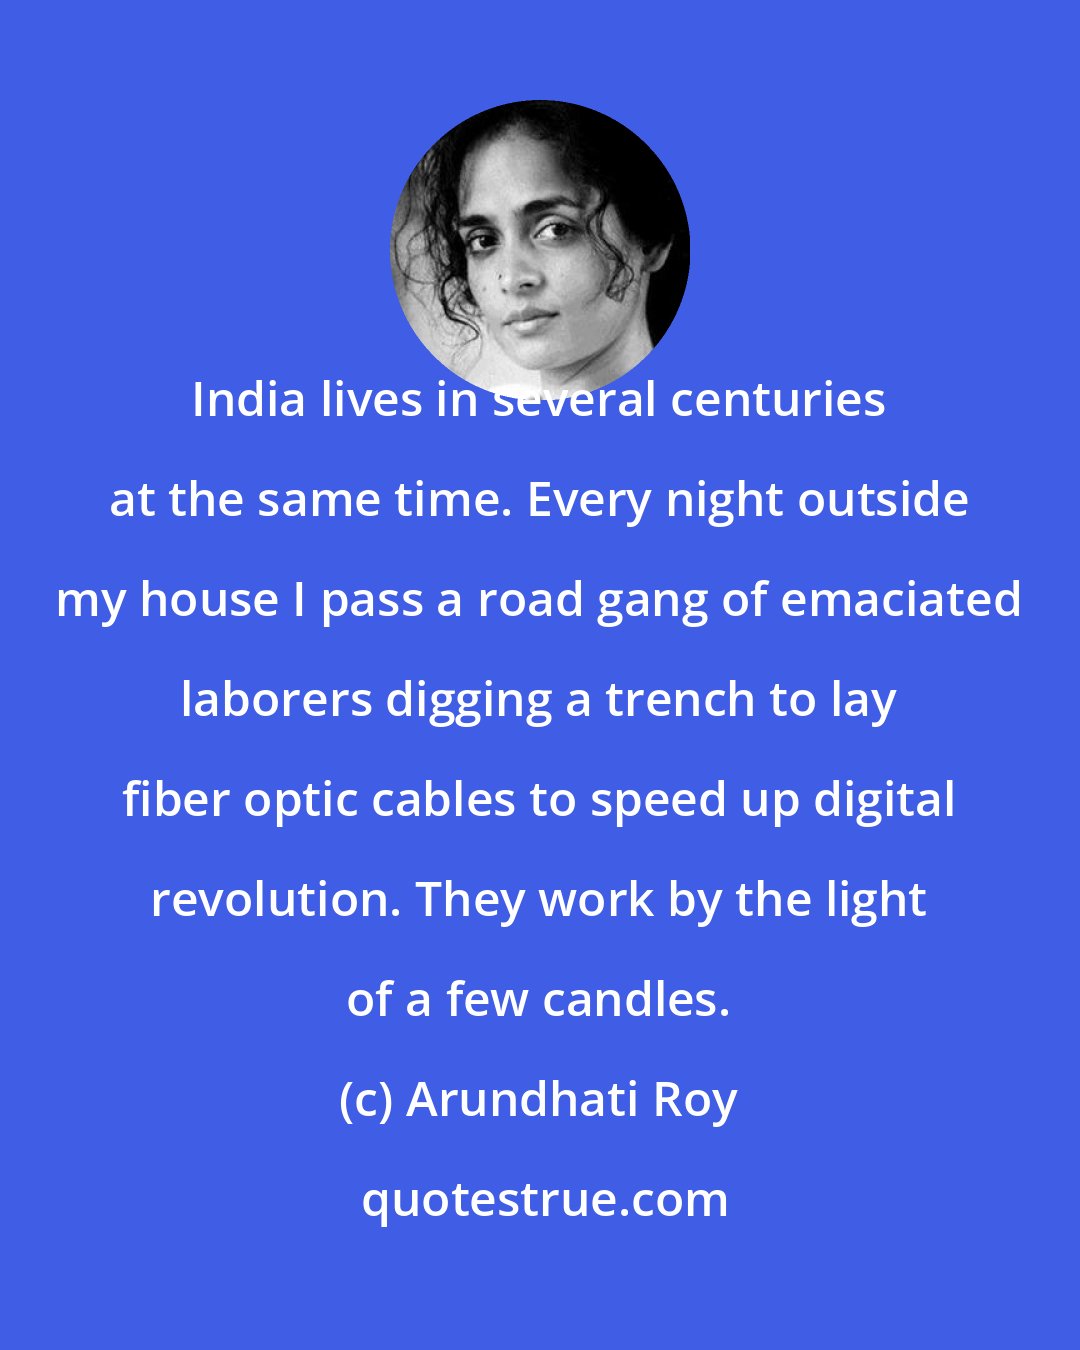 Arundhati Roy: India lives in several centuries at the same time. Every night outside my house I pass a road gang of emaciated laborers digging a trench to lay fiber optic cables to speed up digital revolution. They work by the light of a few candles.